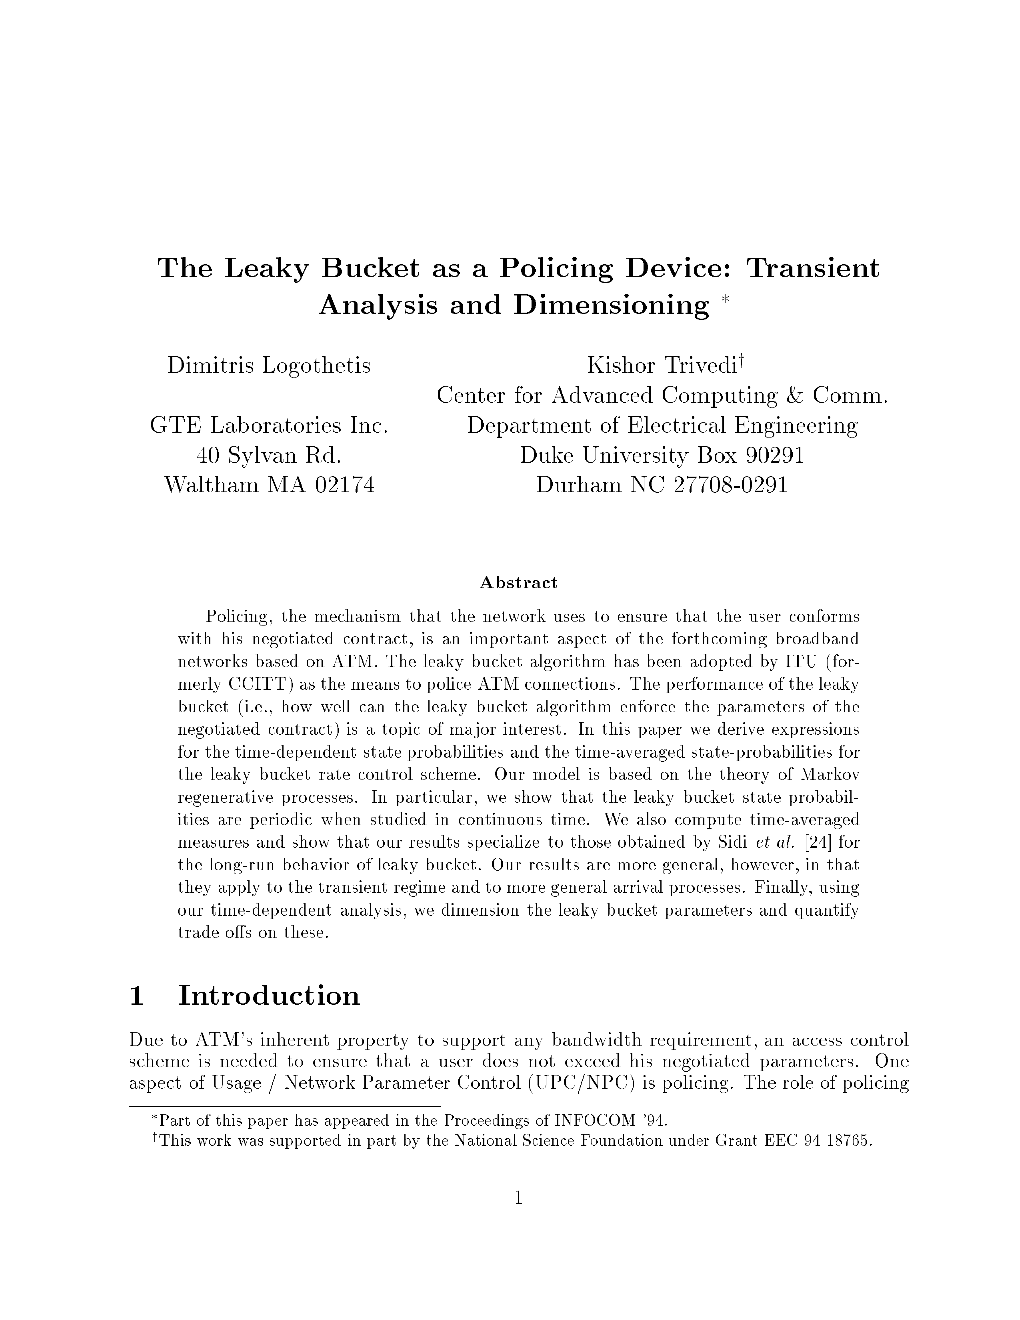 The Leaky Bucket As a Policing Device: Transient Analysis and Dimensioning 1 Introduction